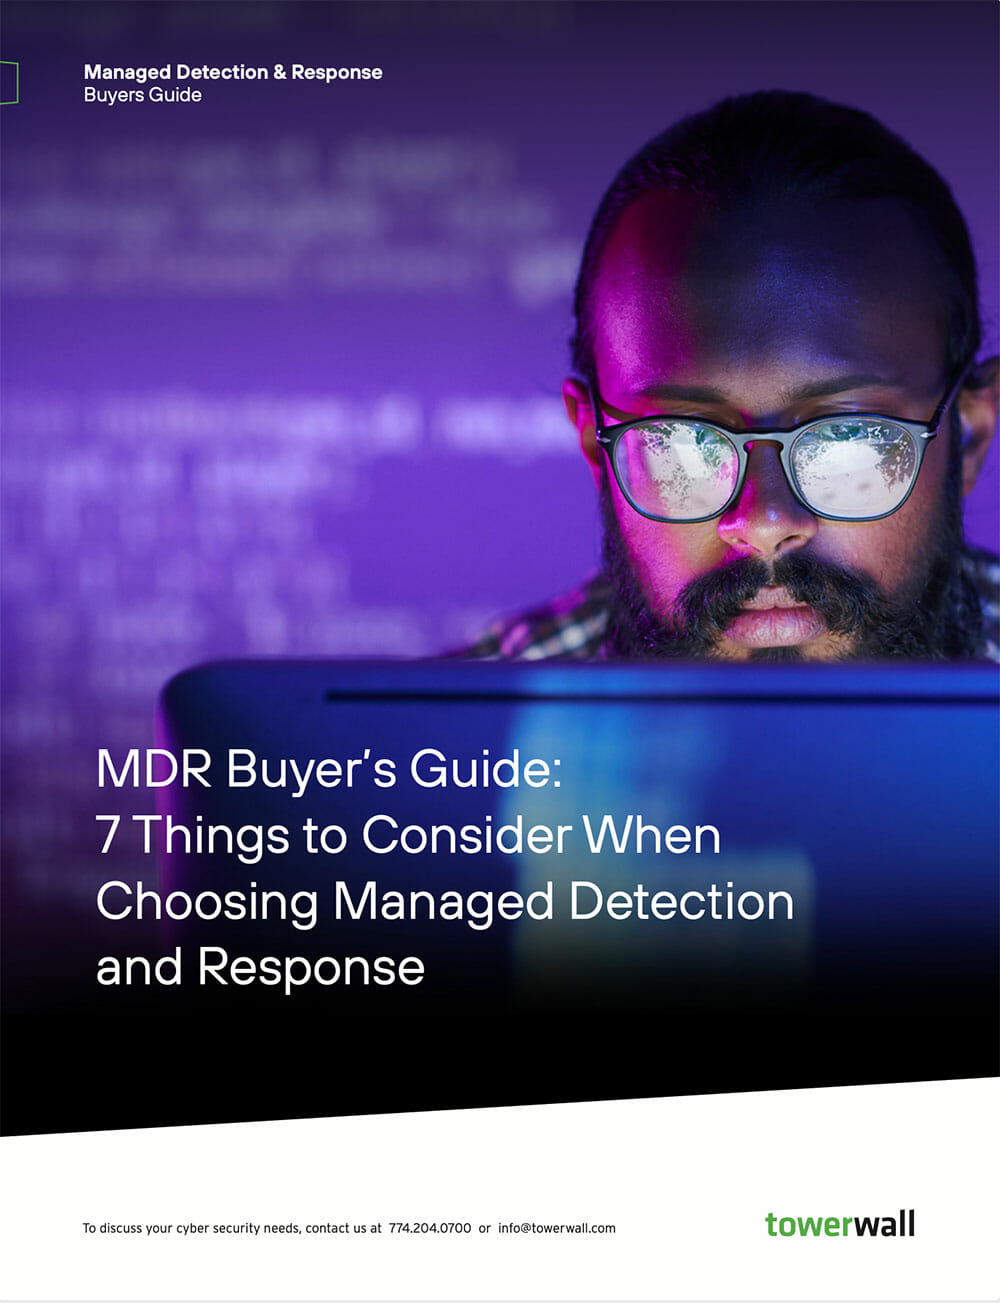 MDR Buyers Guide 7 Things to Consider When Choosing Managed Detection and Response thumb